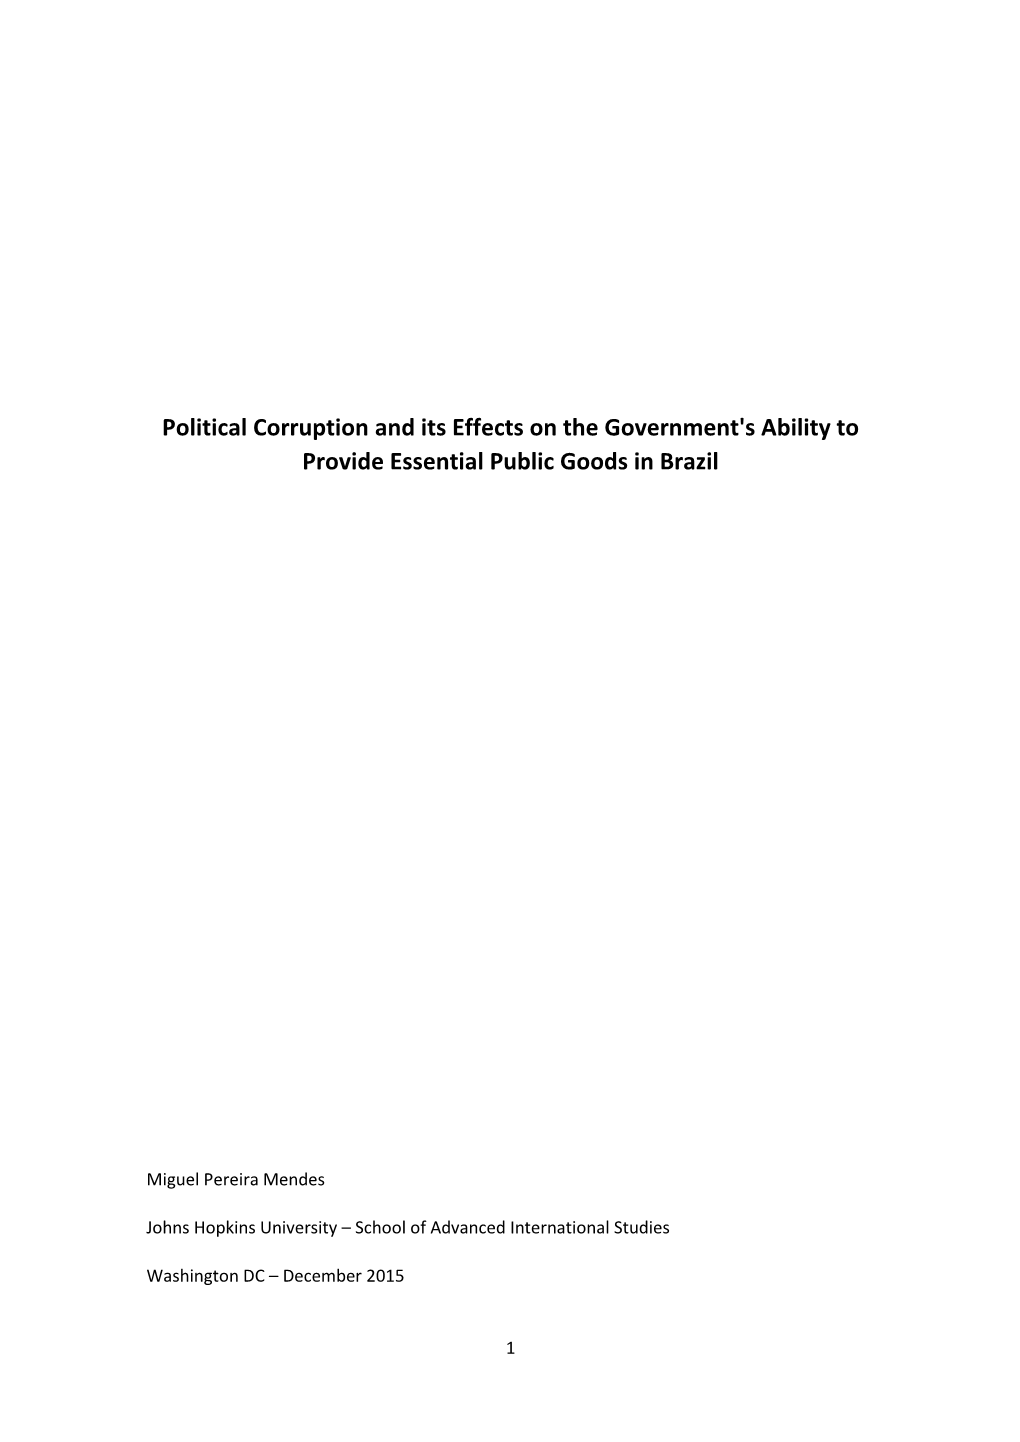 Political Corruption and Its Effects on the Government's Ability to Provide Essential Public Goods in Brazil